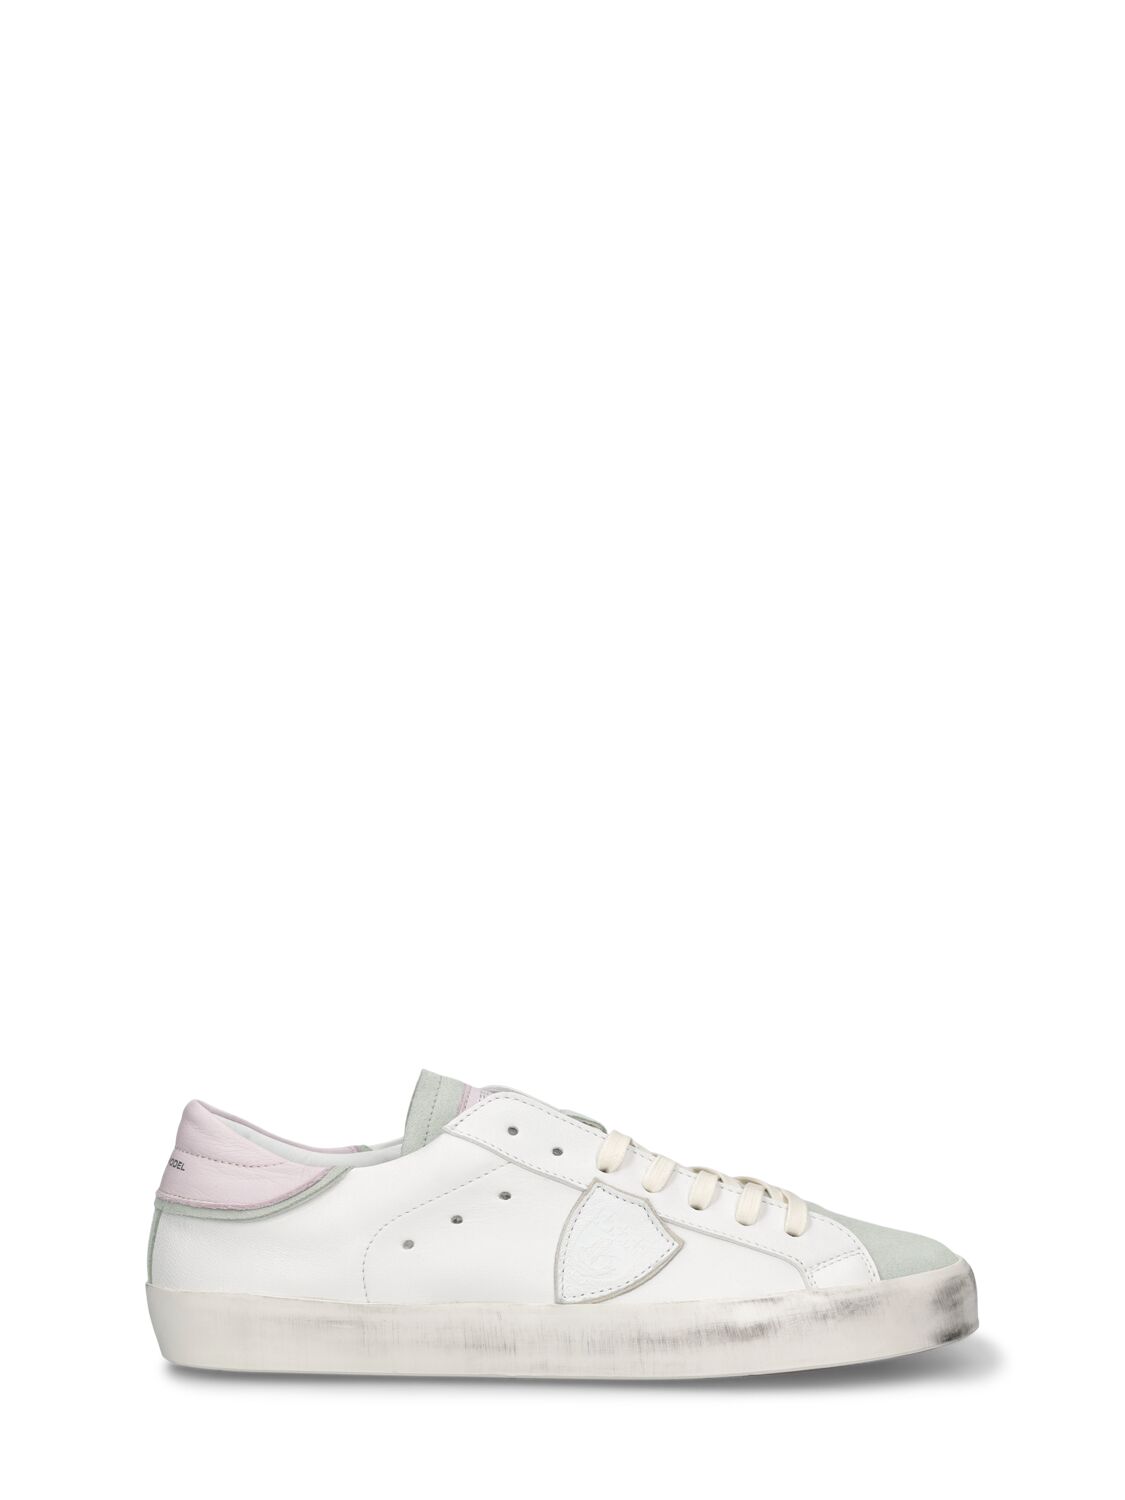 Philippe Model Kids' Paris Leather Lace-up Sneakers In 화이트,핑크